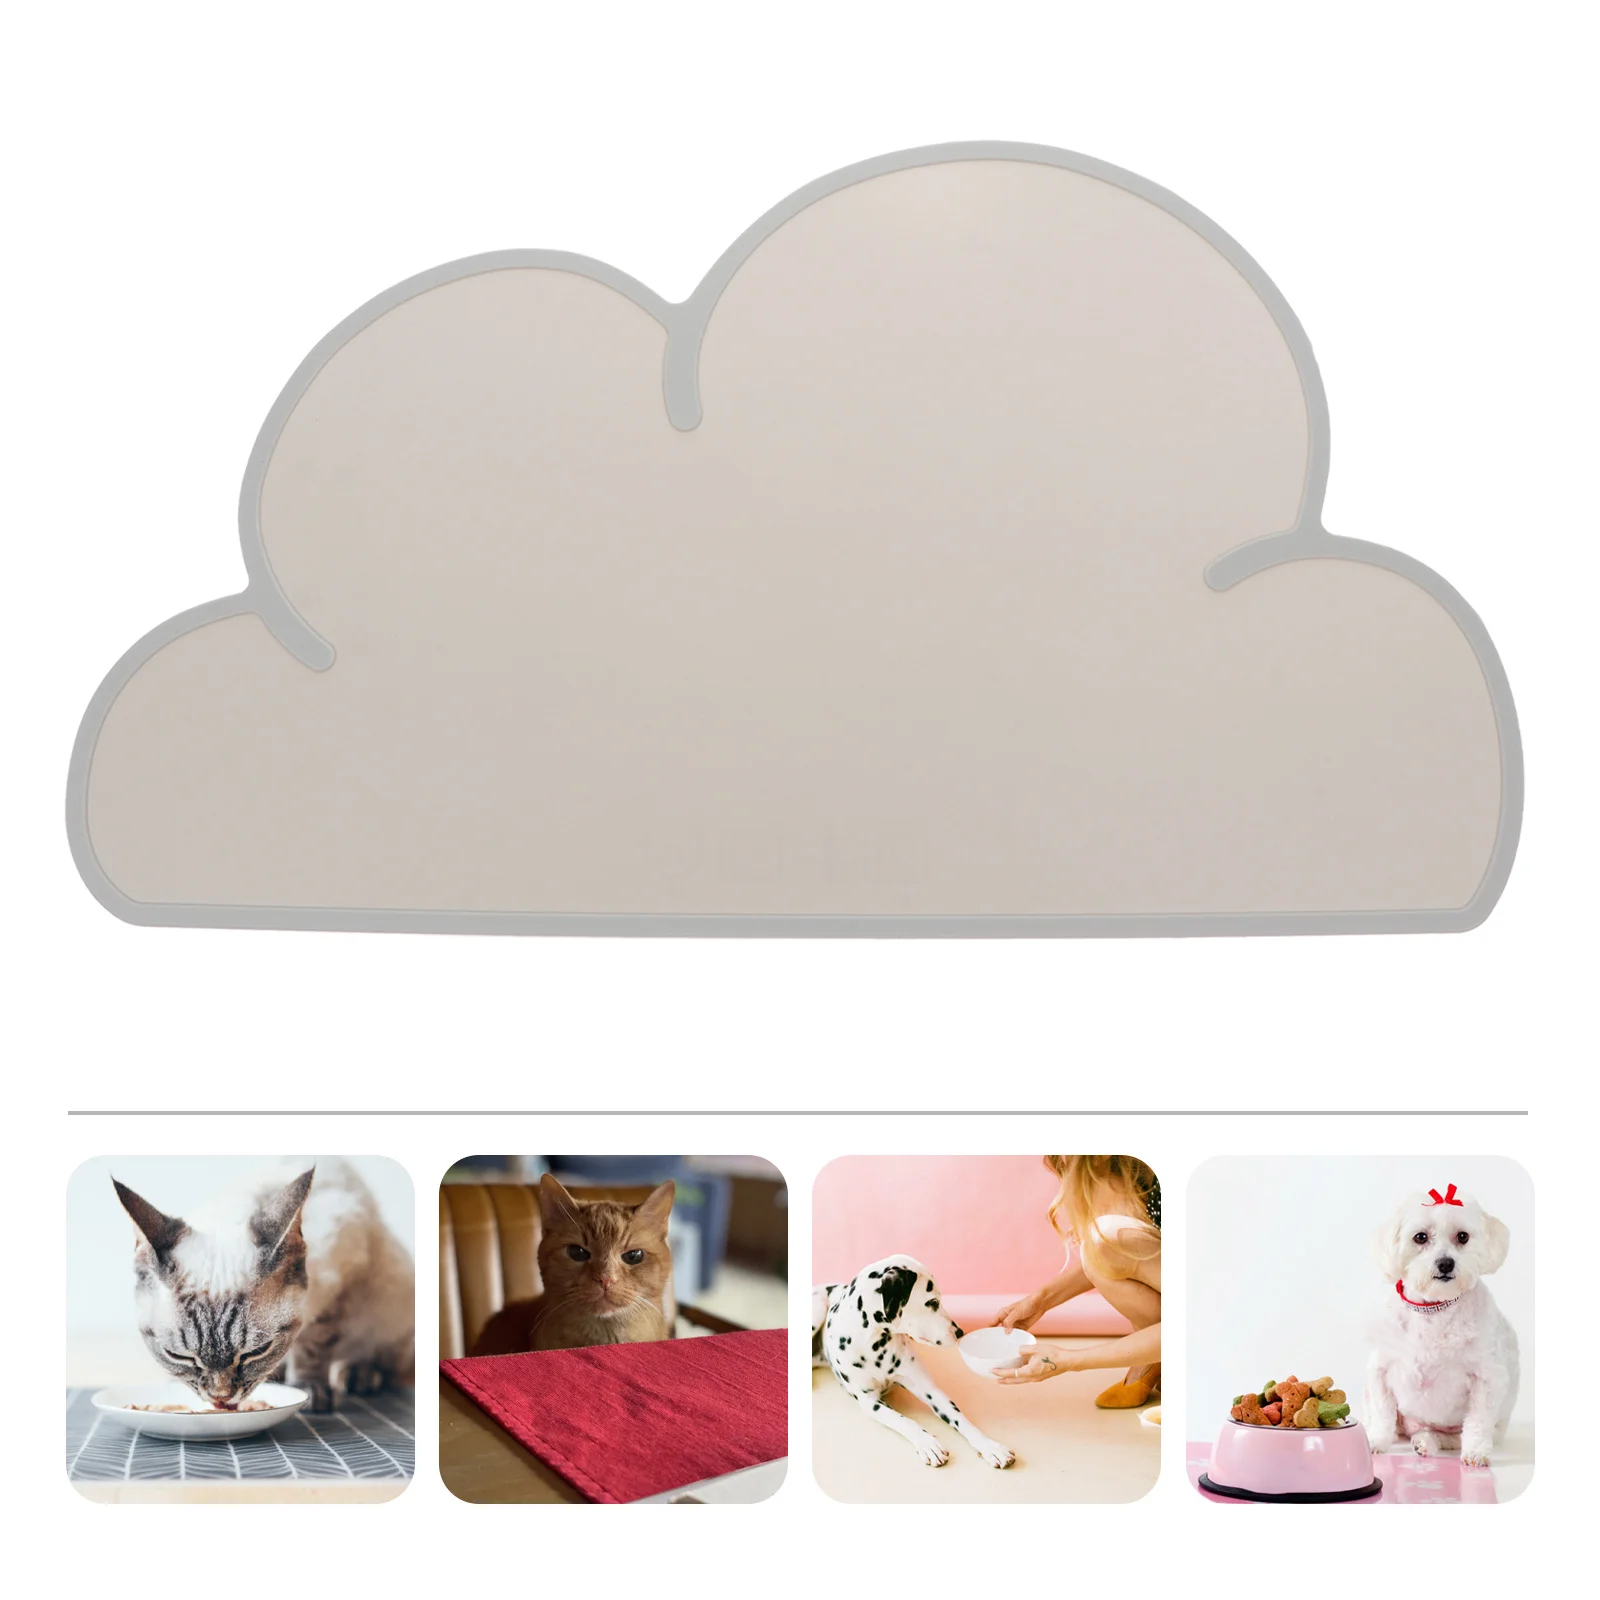 

Mat Dogcat Placemat Pet Bowl Silicone Tray Feeding Feeder Pad Eating Anti Trapping Dinnerslow Litter Water Dish Kitten Feed